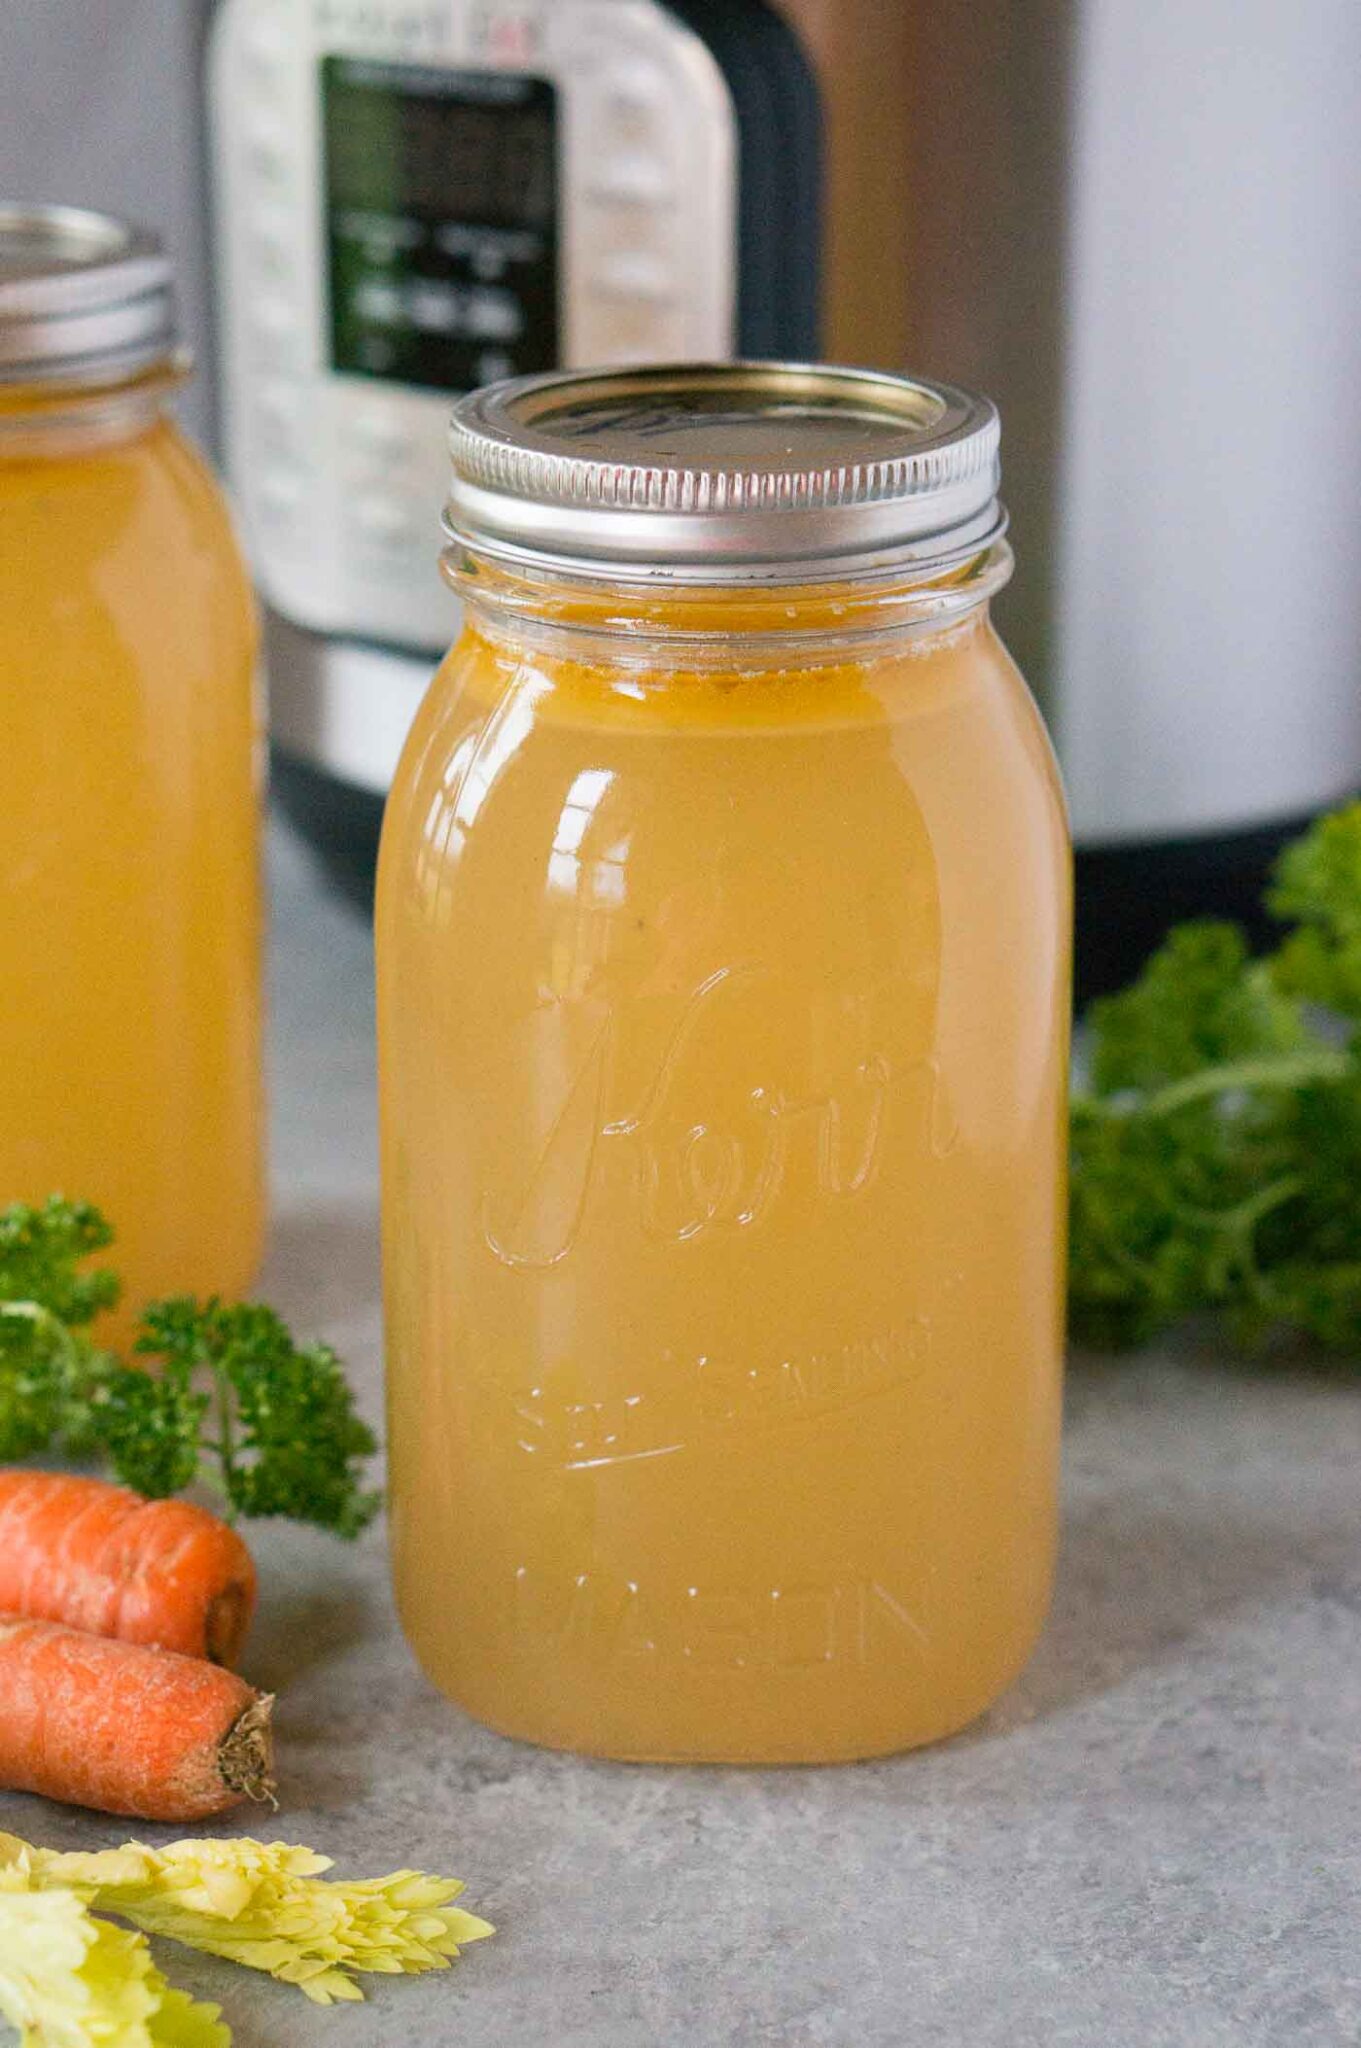 Instant pot chicken stock/broth in a jar